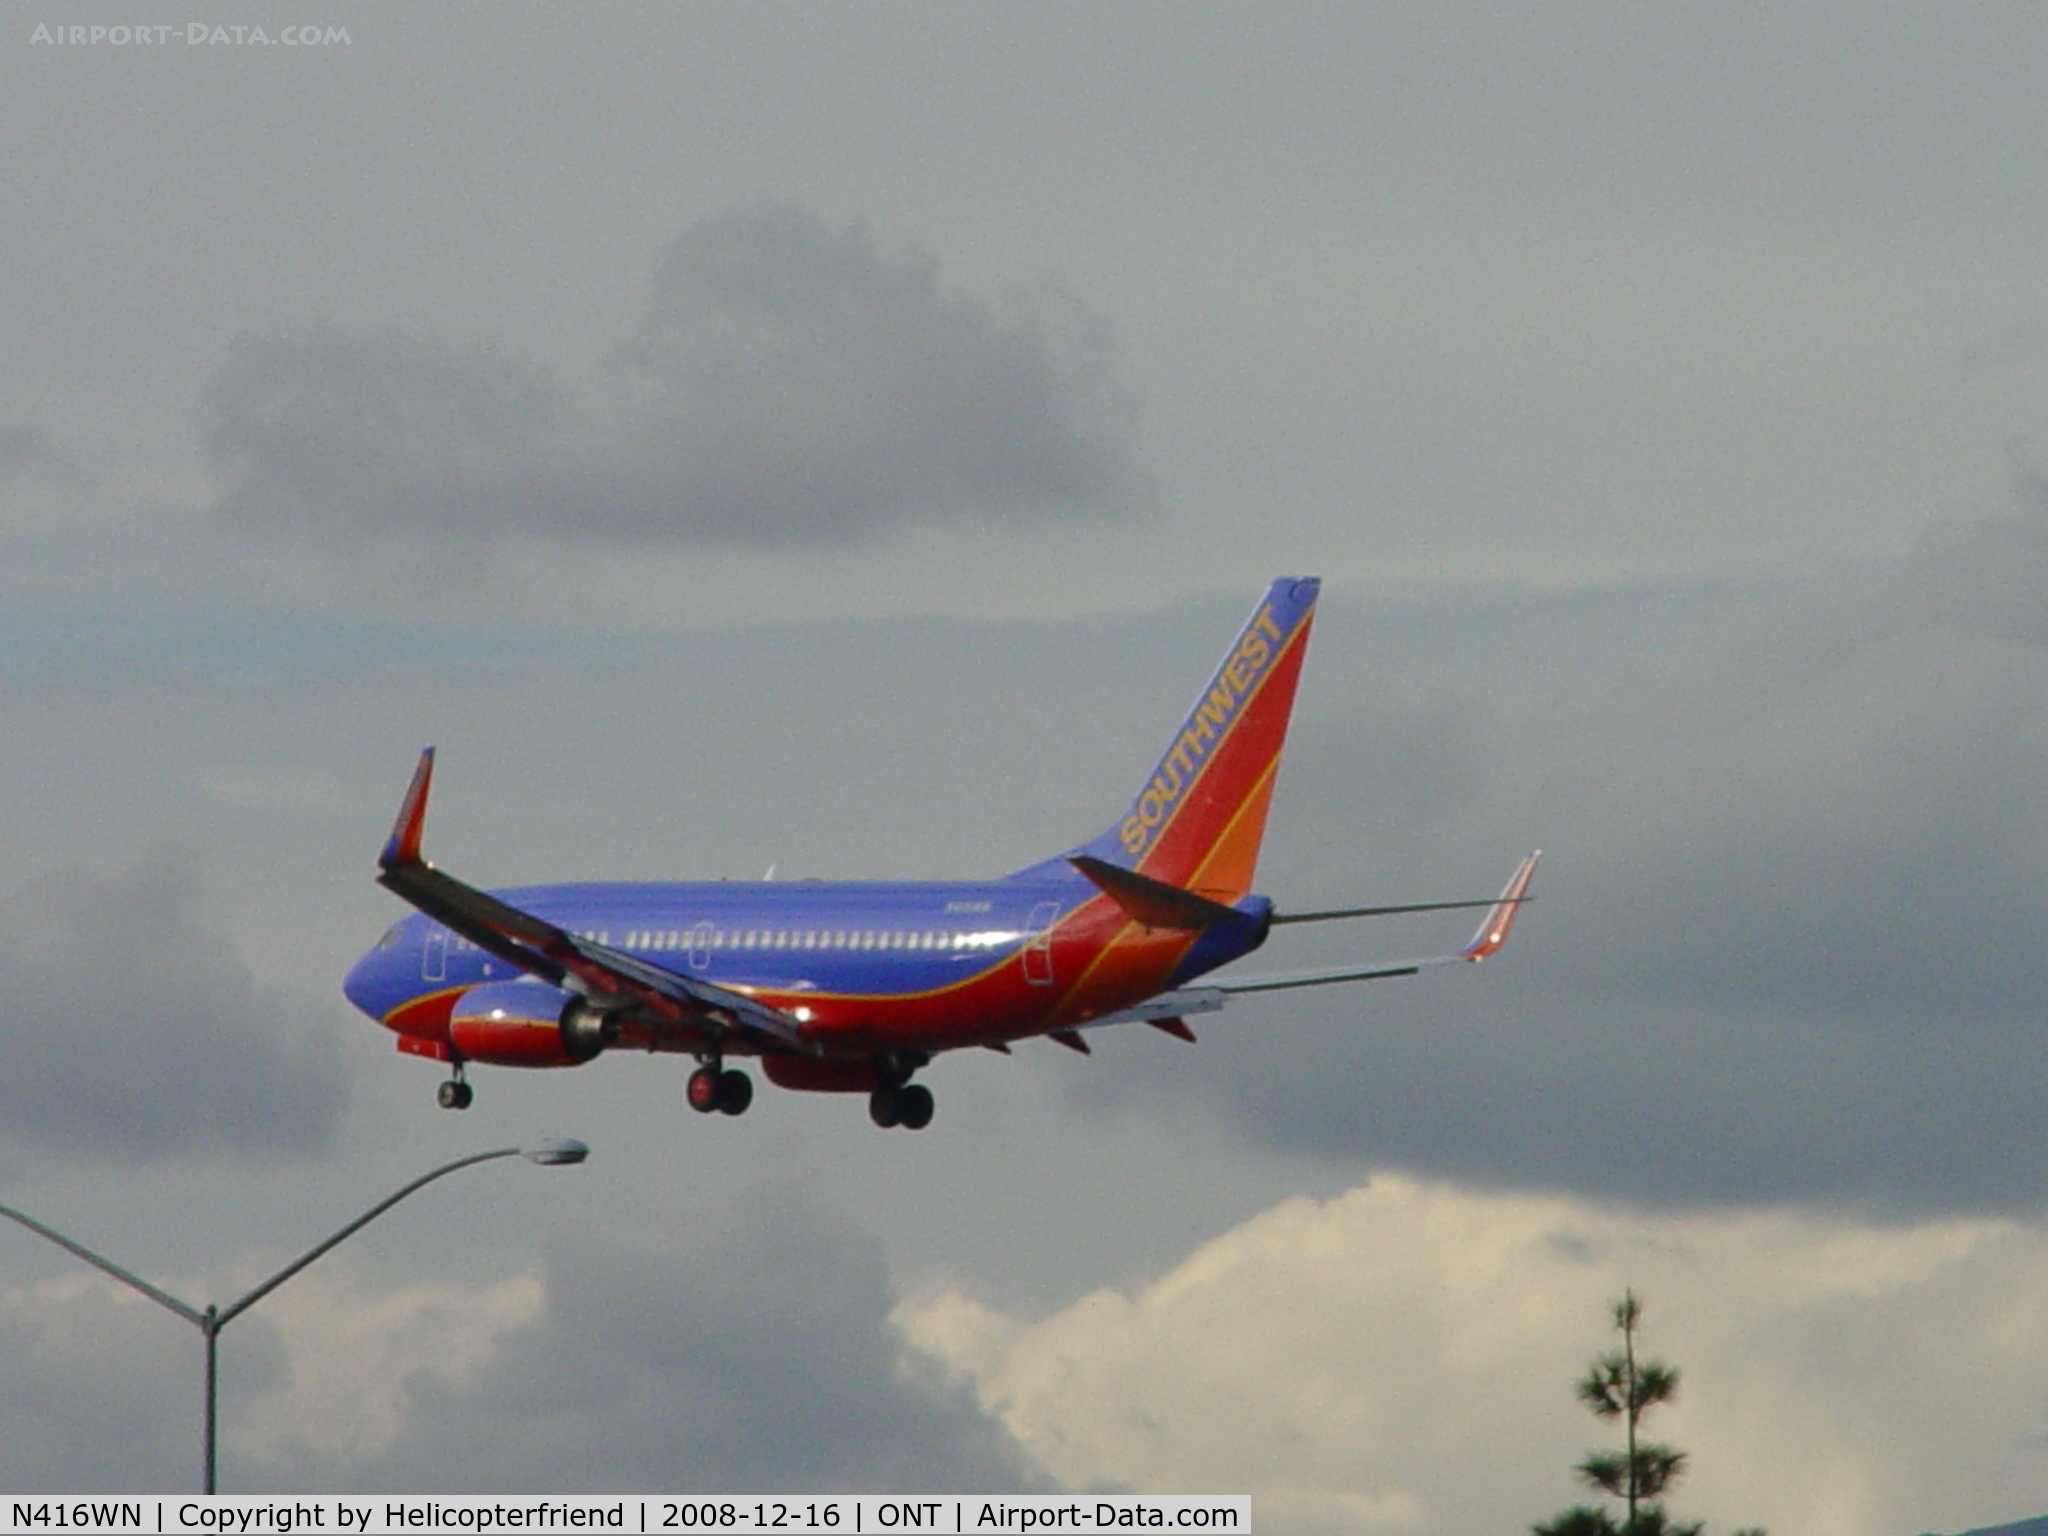 N416WN, 2001 Boeing 737-7H4 C/N 32453, Over the outer fece a Ontario Airport